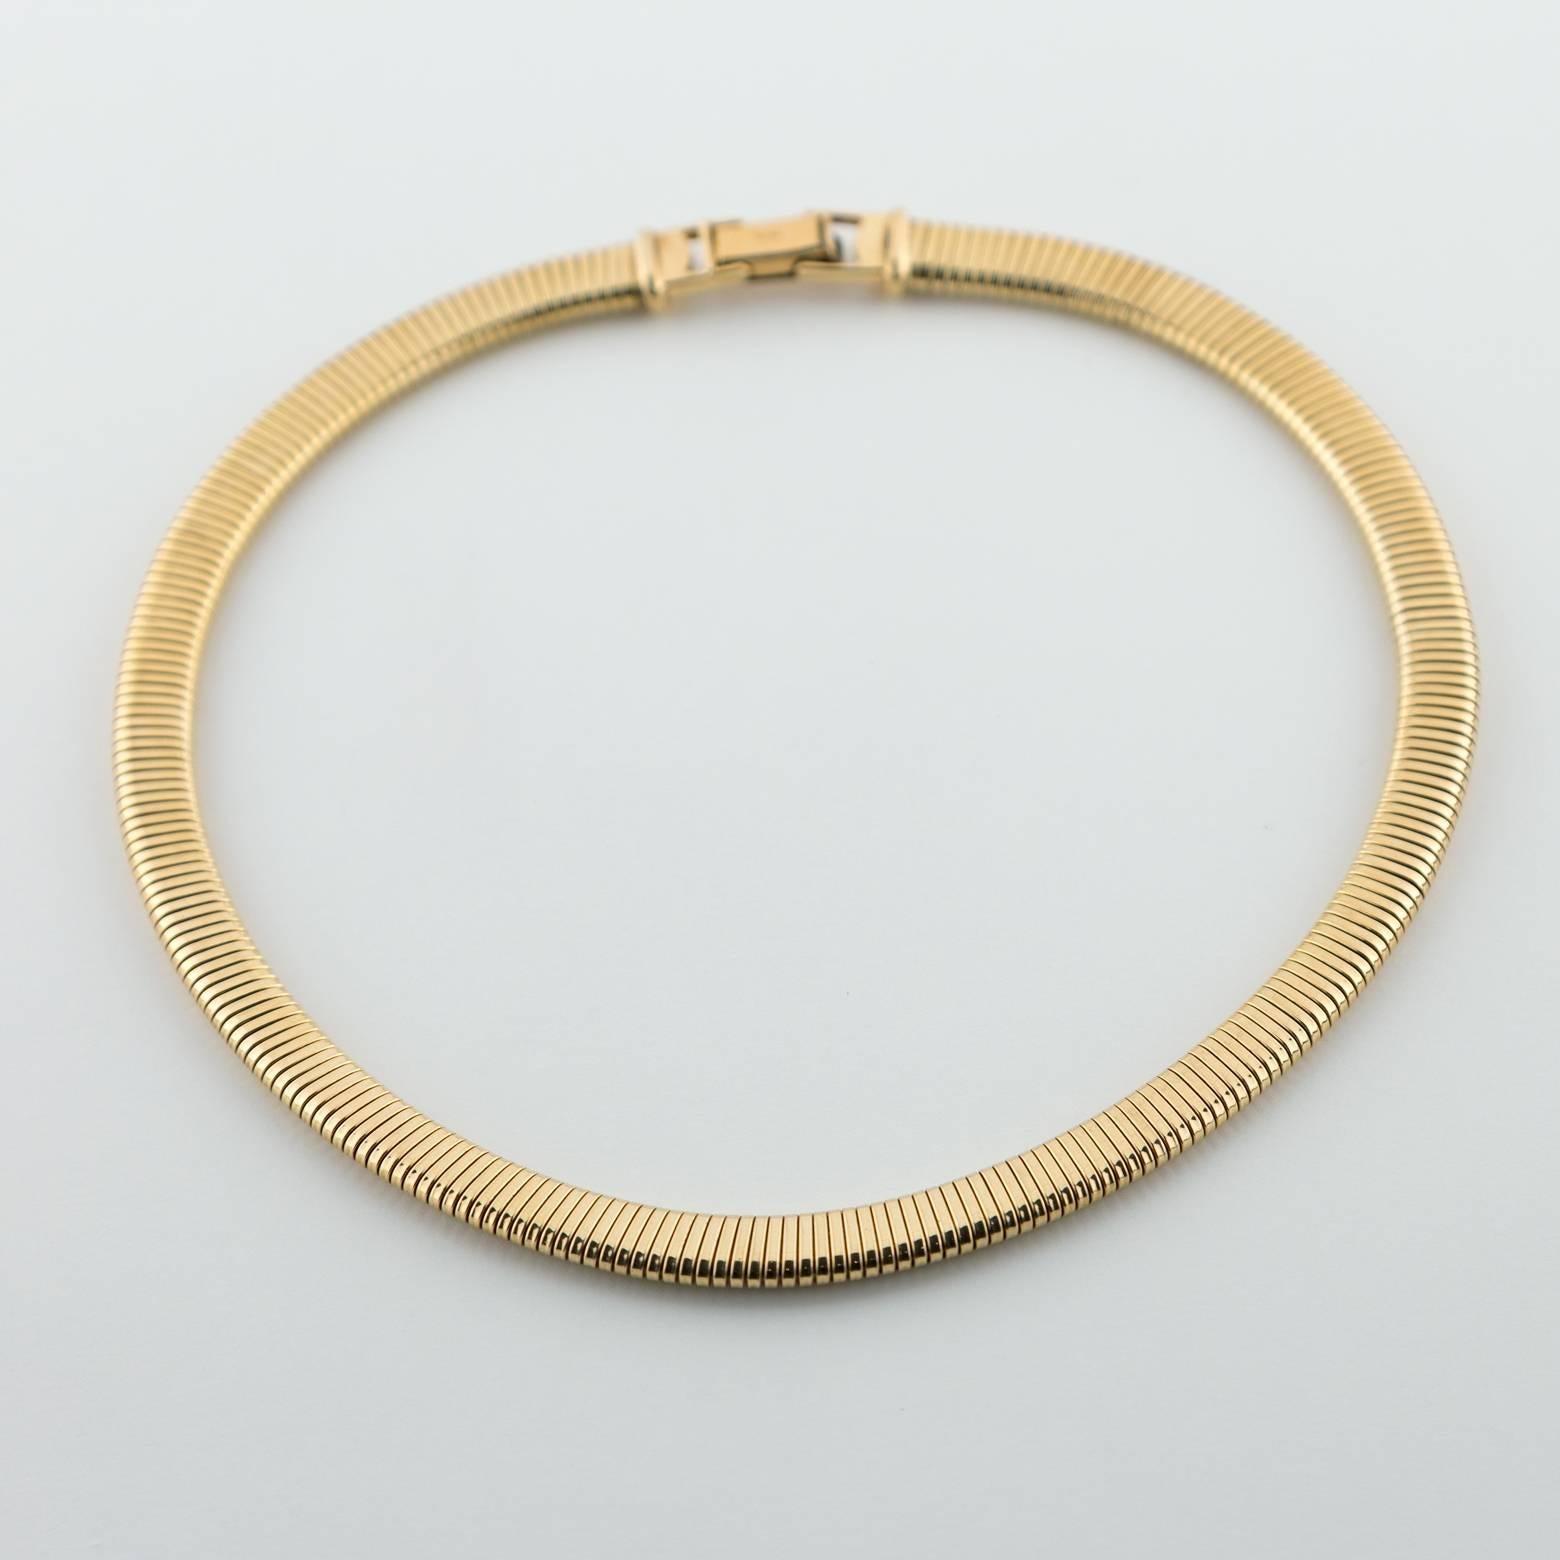 This beautiful 14K gold choker is a stunner! Elegant, bright, solid and stable this gold necklace is a perfect for any occasion and has a little stretch to it. You could easily add a pendant to it for a totally different look.